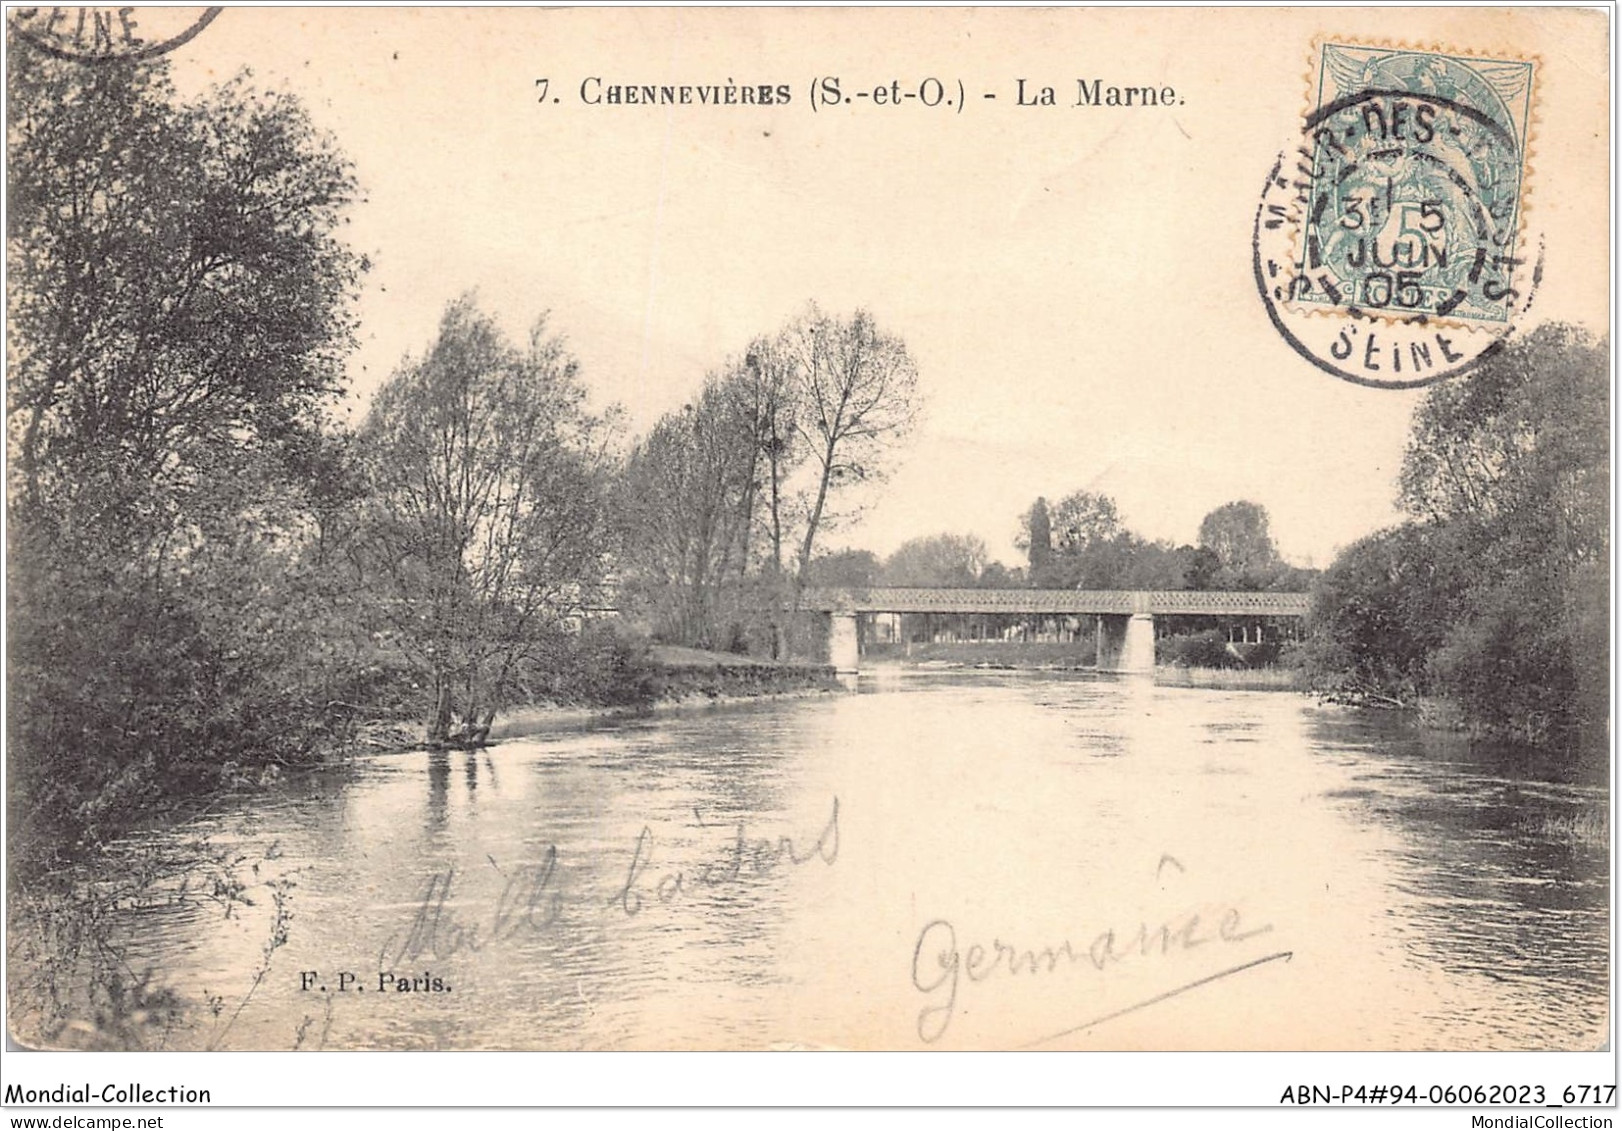 ABNP4-94-0287 - CHENNEVIERES - La Marne - Chennevieres Sur Marne